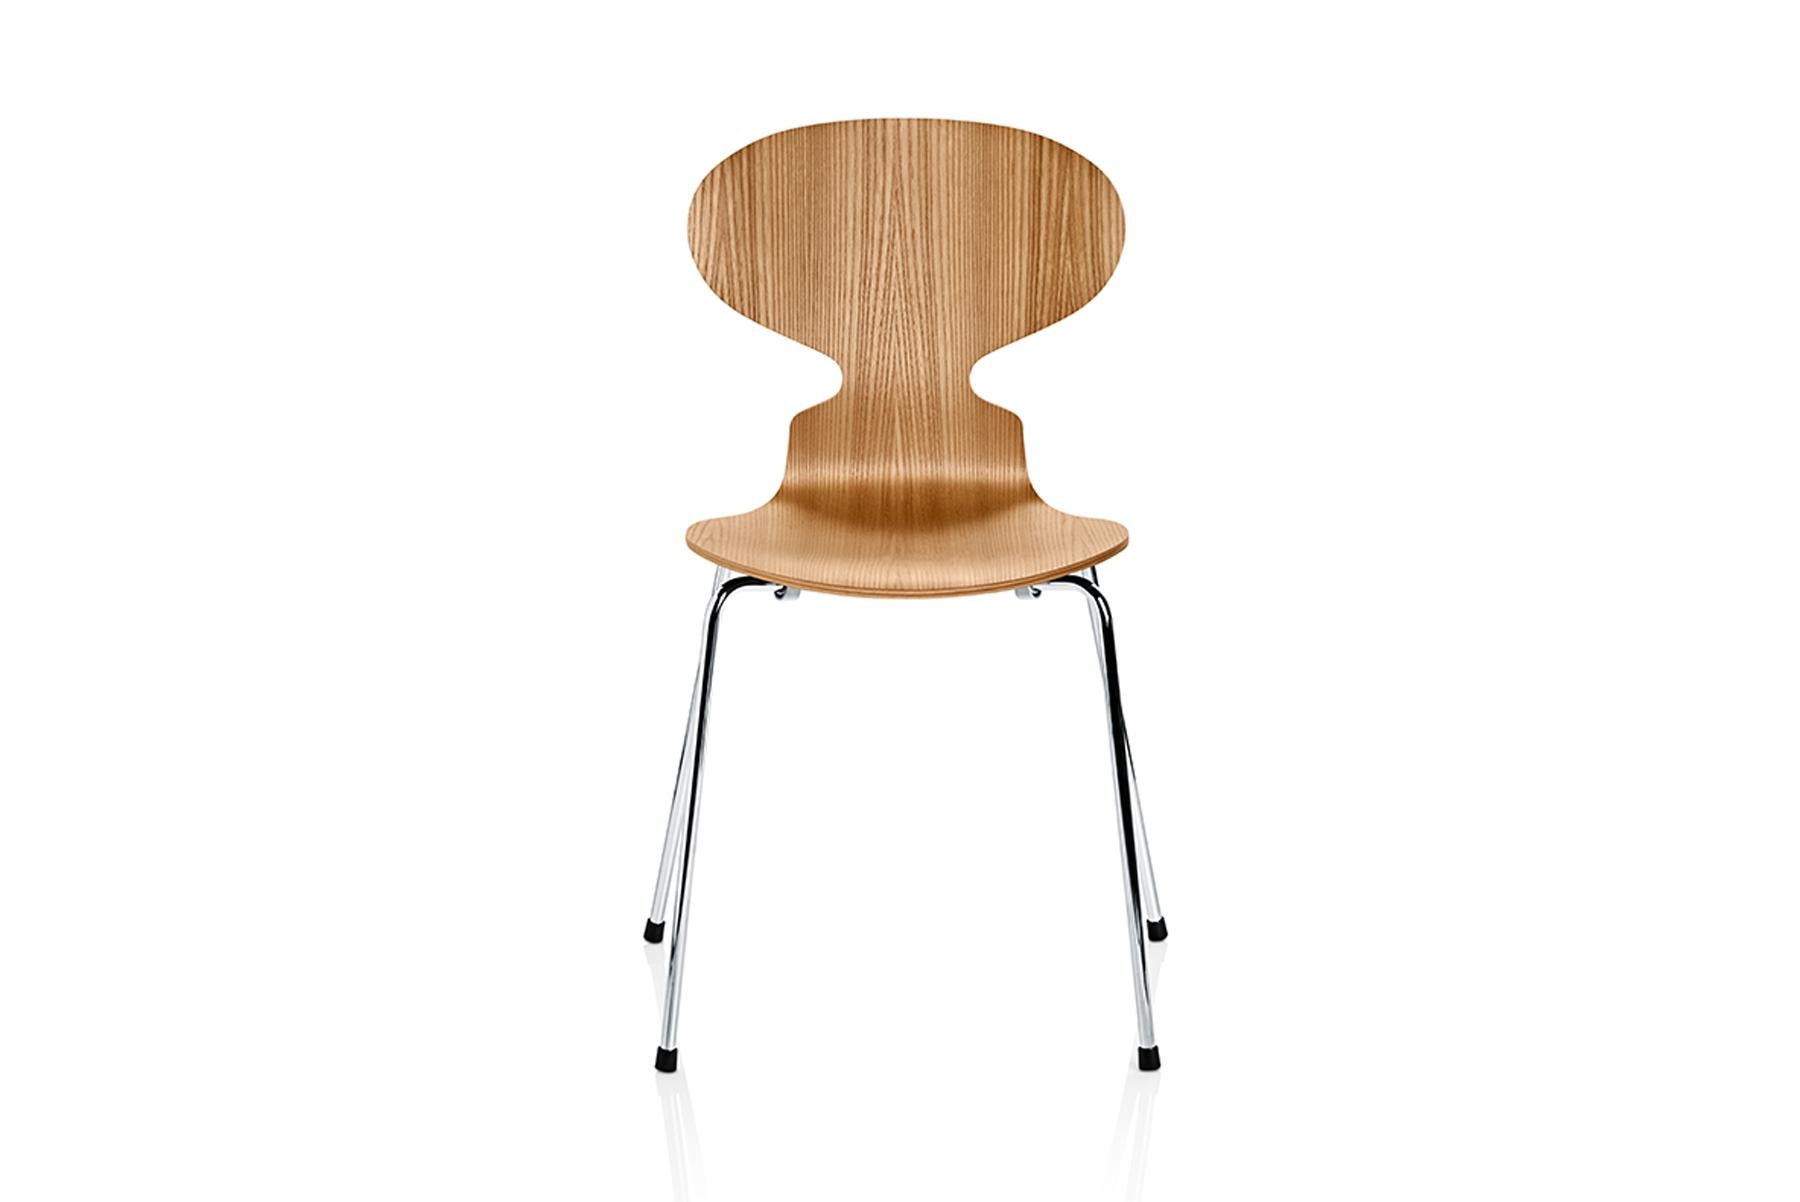 Did you know,. that Arne Jacobsen originally designed the iconic Ant™ chair as a three-legged chair? Today, the Ant™ comes in different types of veneer, as well as with a coloured ash or lacquer finish in all colours. All chairs are made of pressure